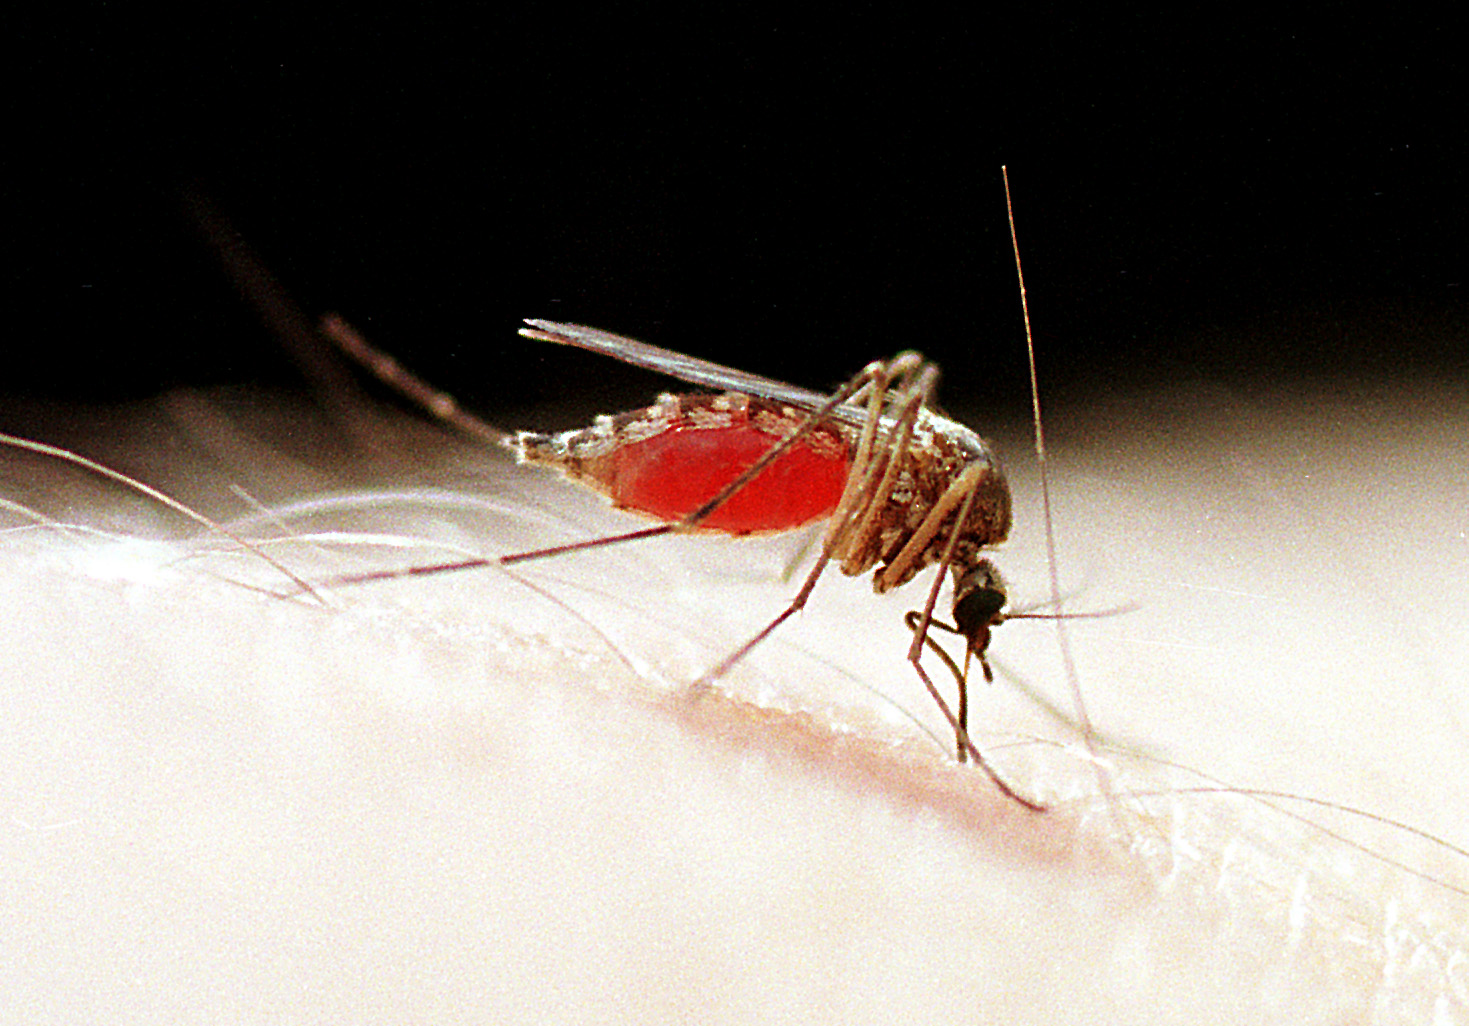 Engorged with blood, a mosquito begins to withdraw from its victim.